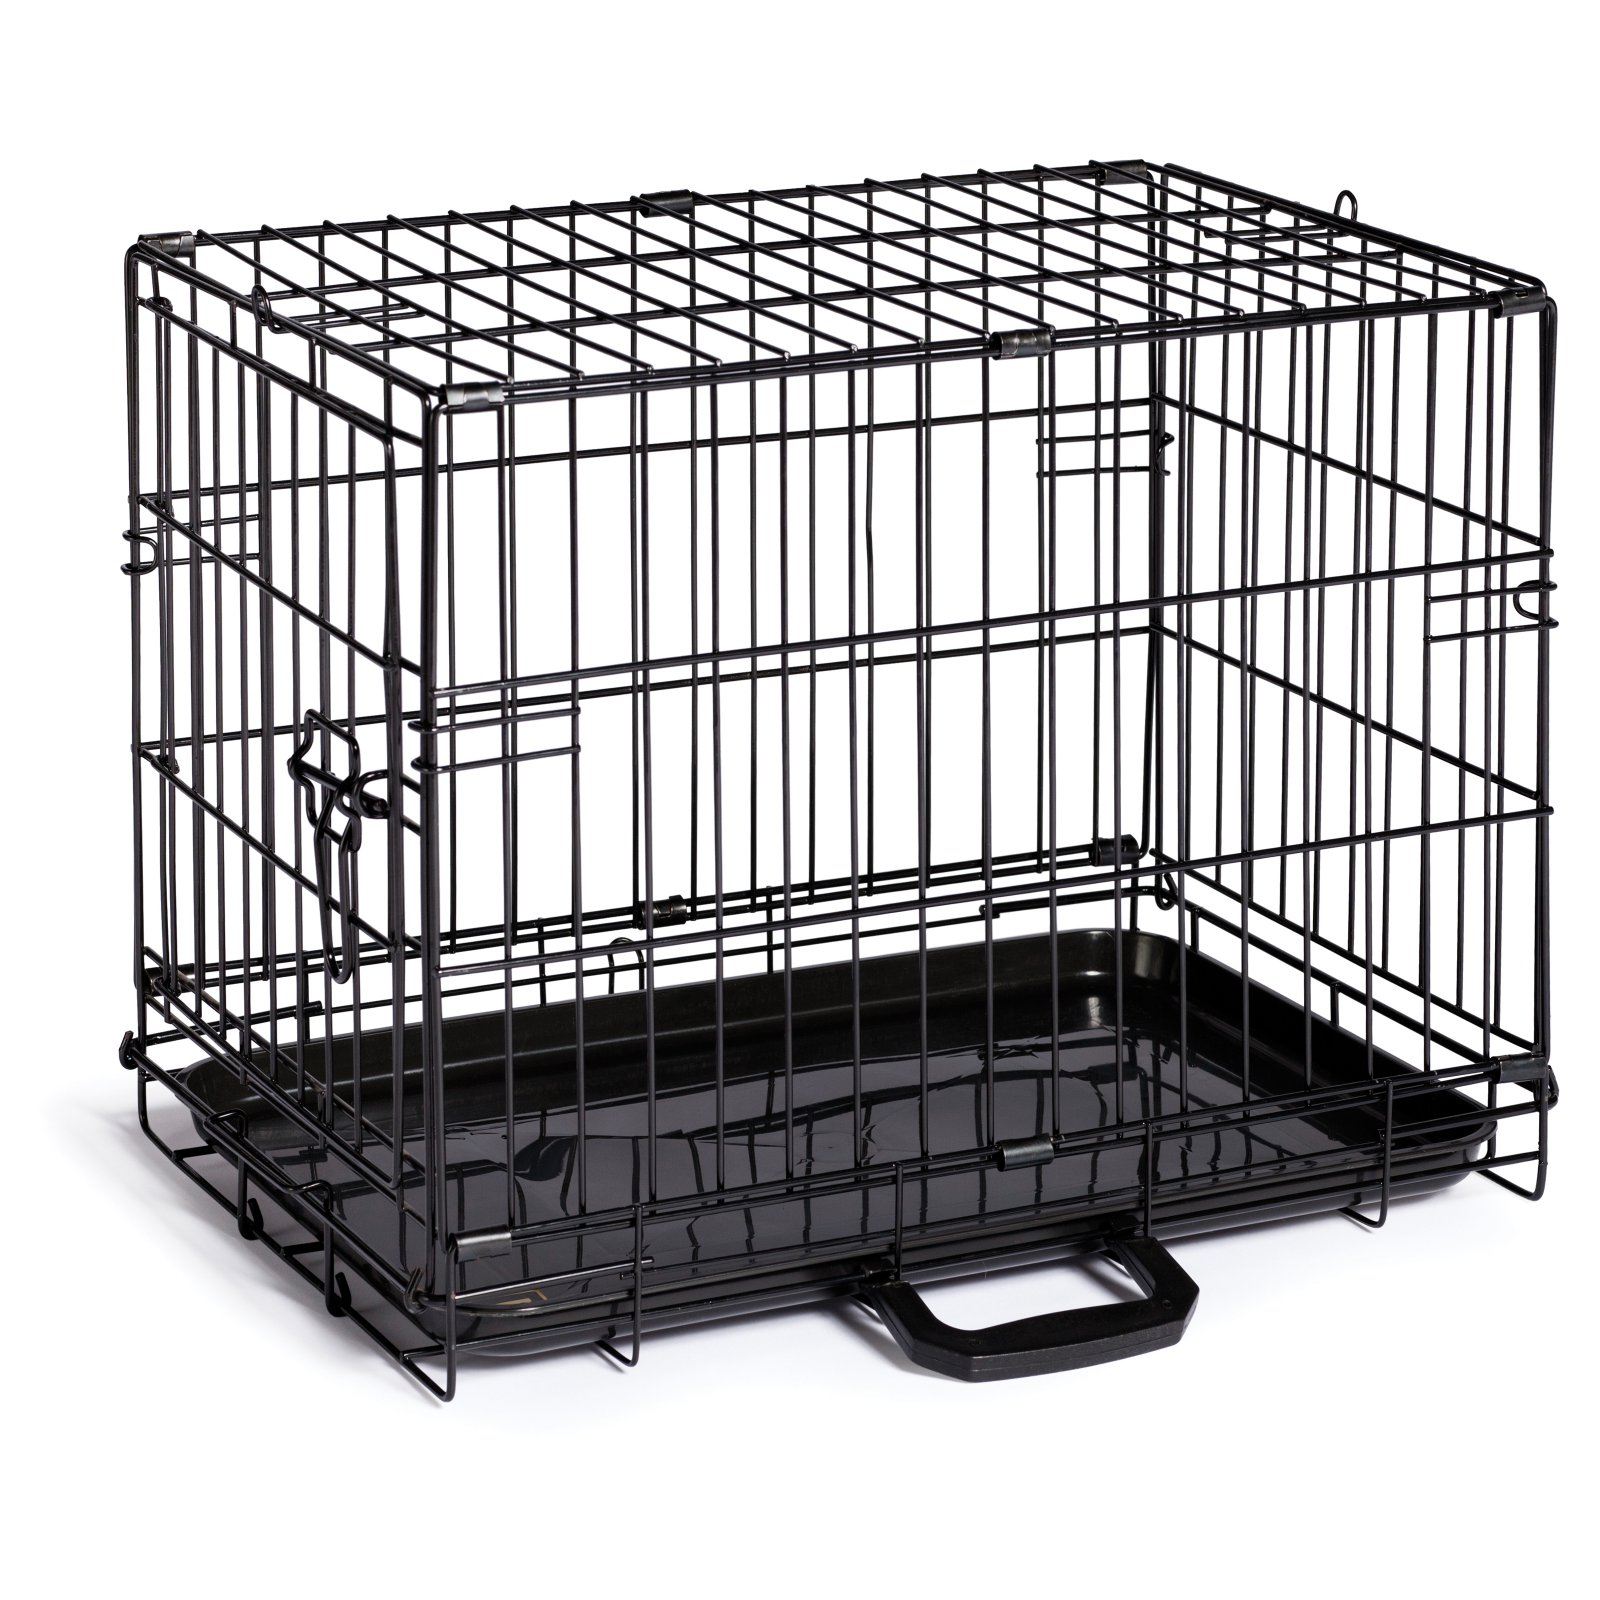 Prevue Pet Products Home On-The-Go Dog Crate, X-Small, 24"L x 16.50"W x 20"H - image 2 of 7